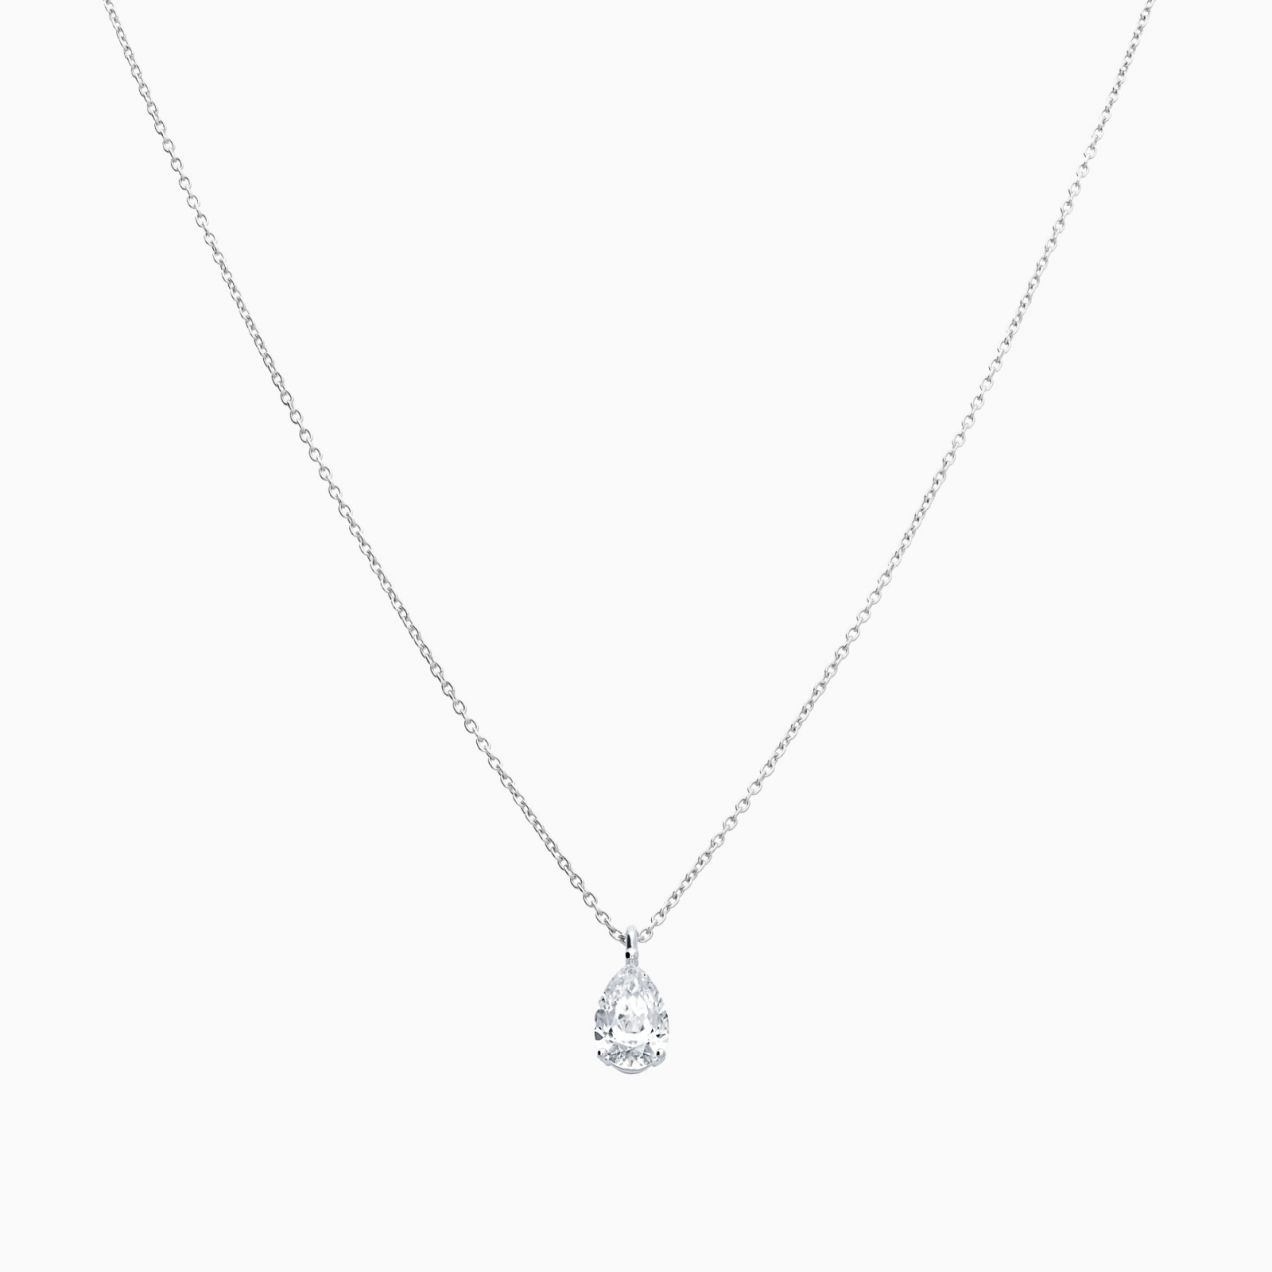 Pendant in white gold with pear-cut diamond